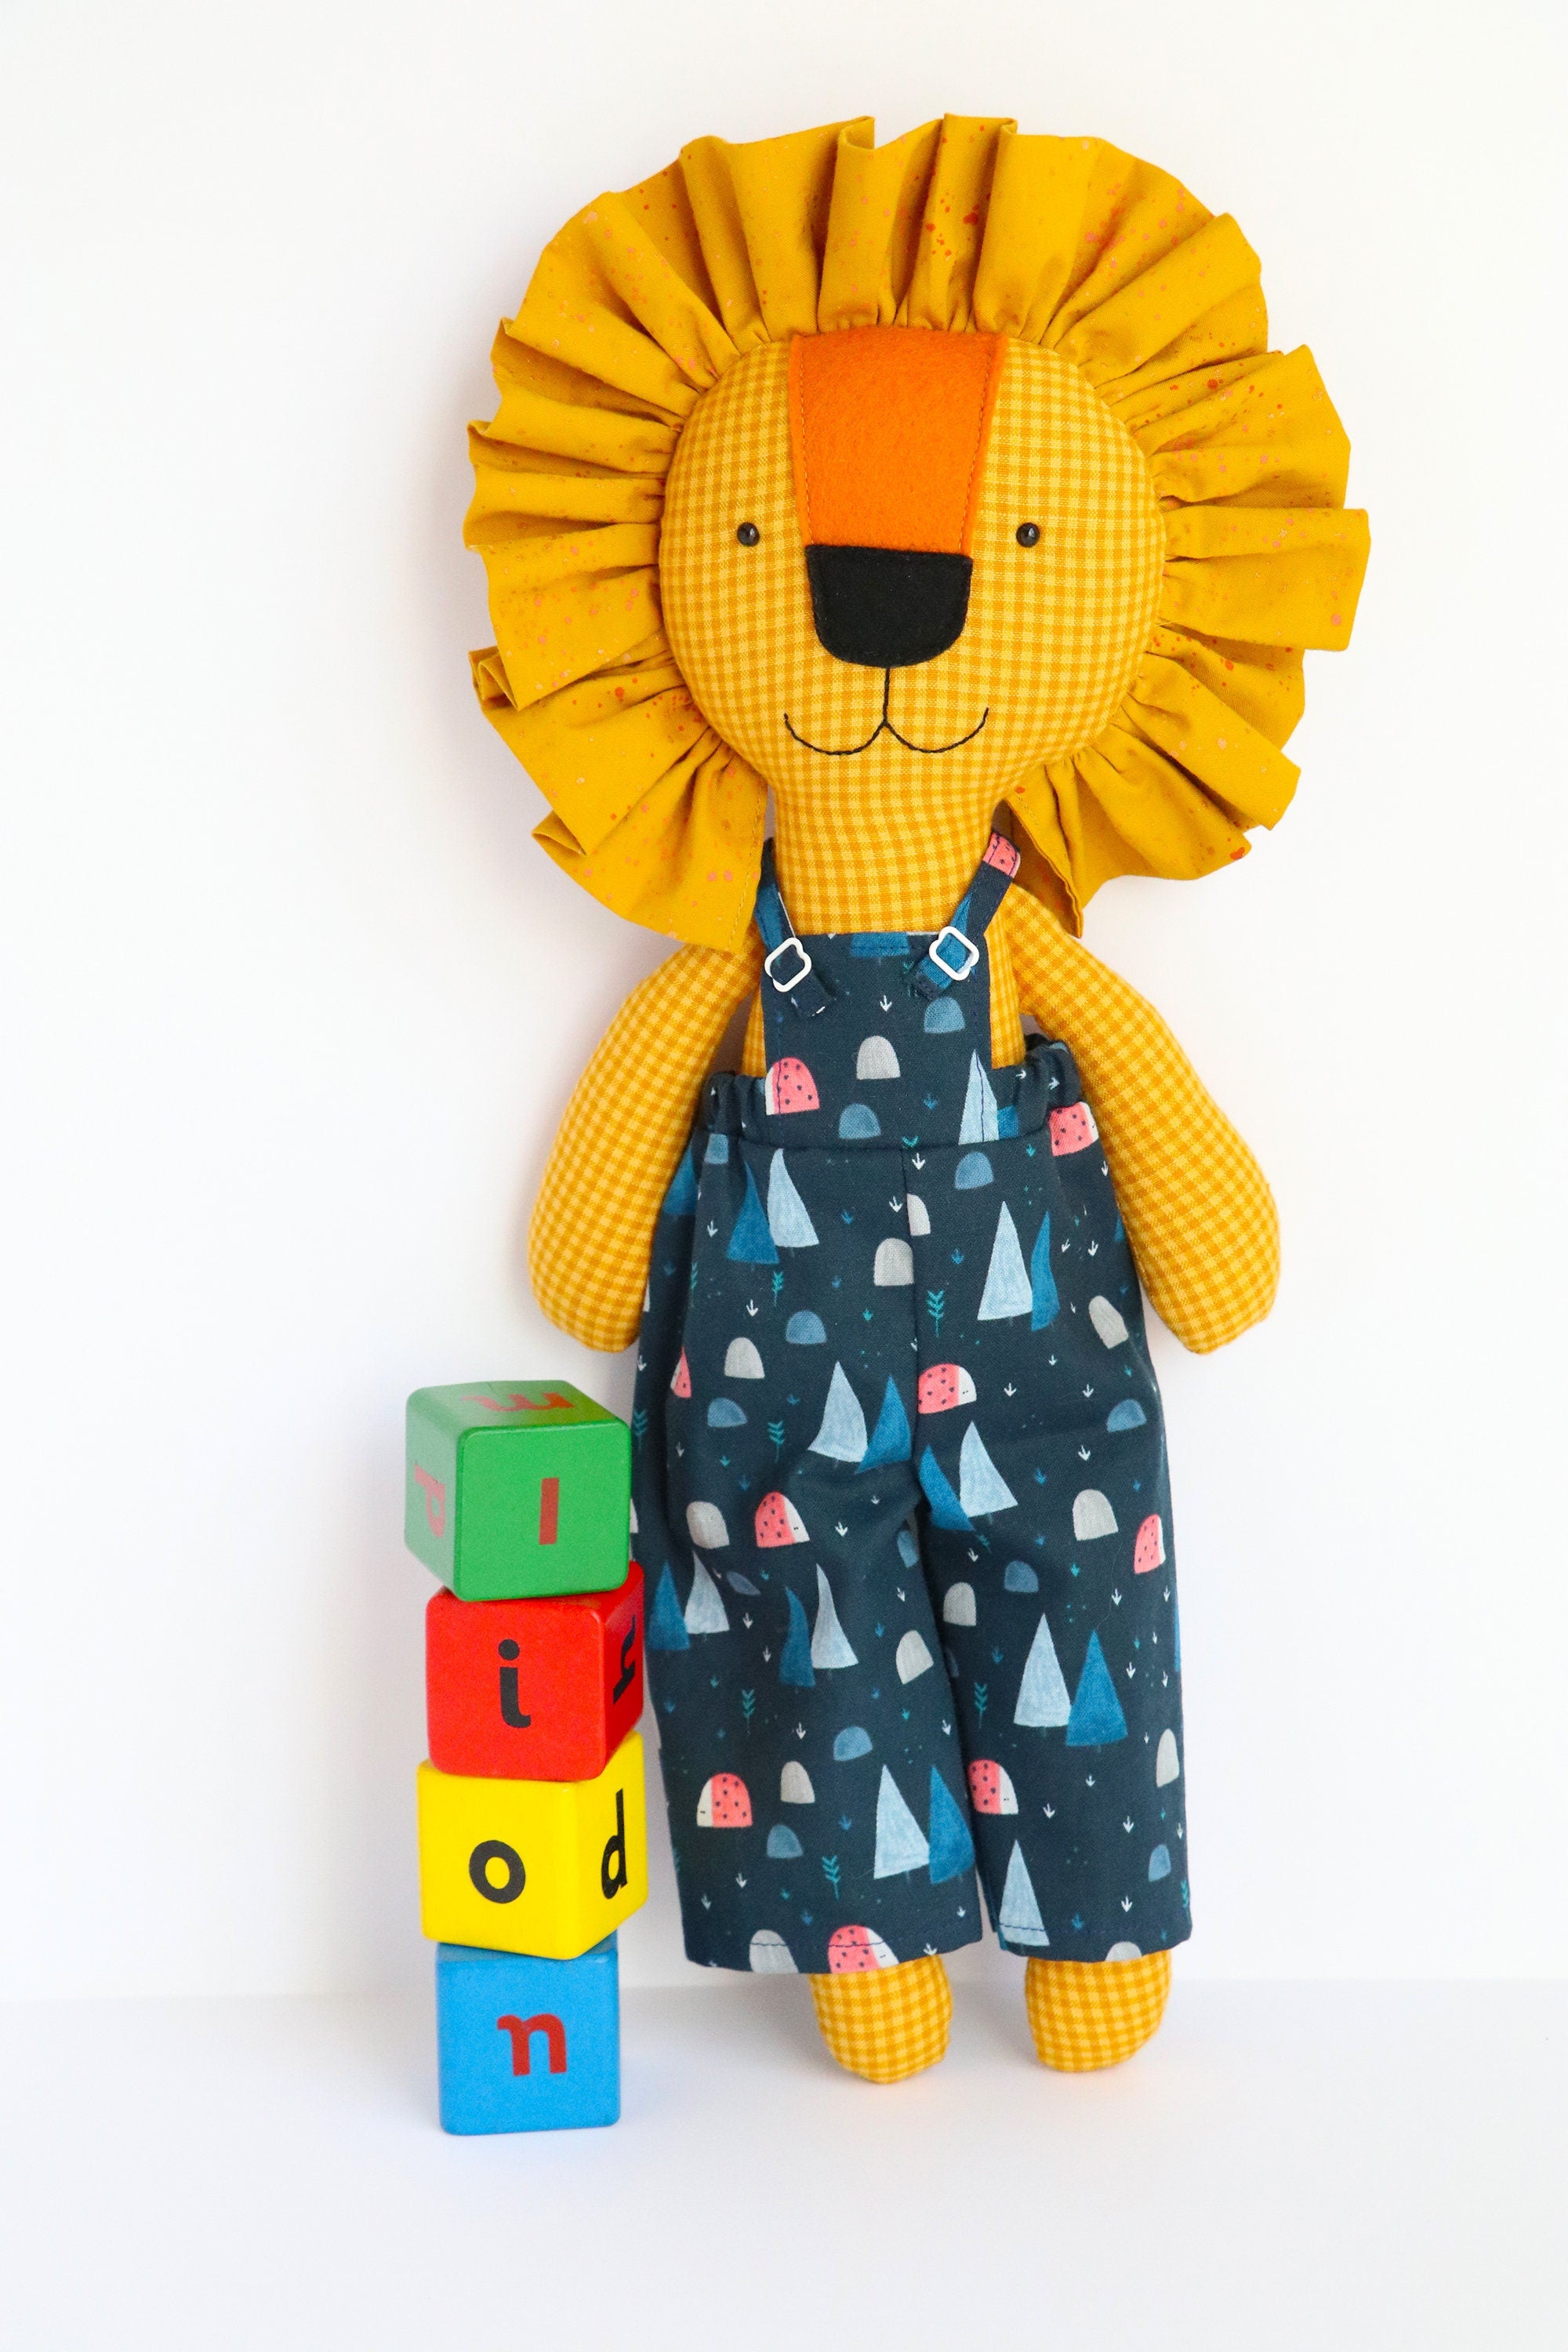 Dandy Lions: Lion sewing pattern with clothes